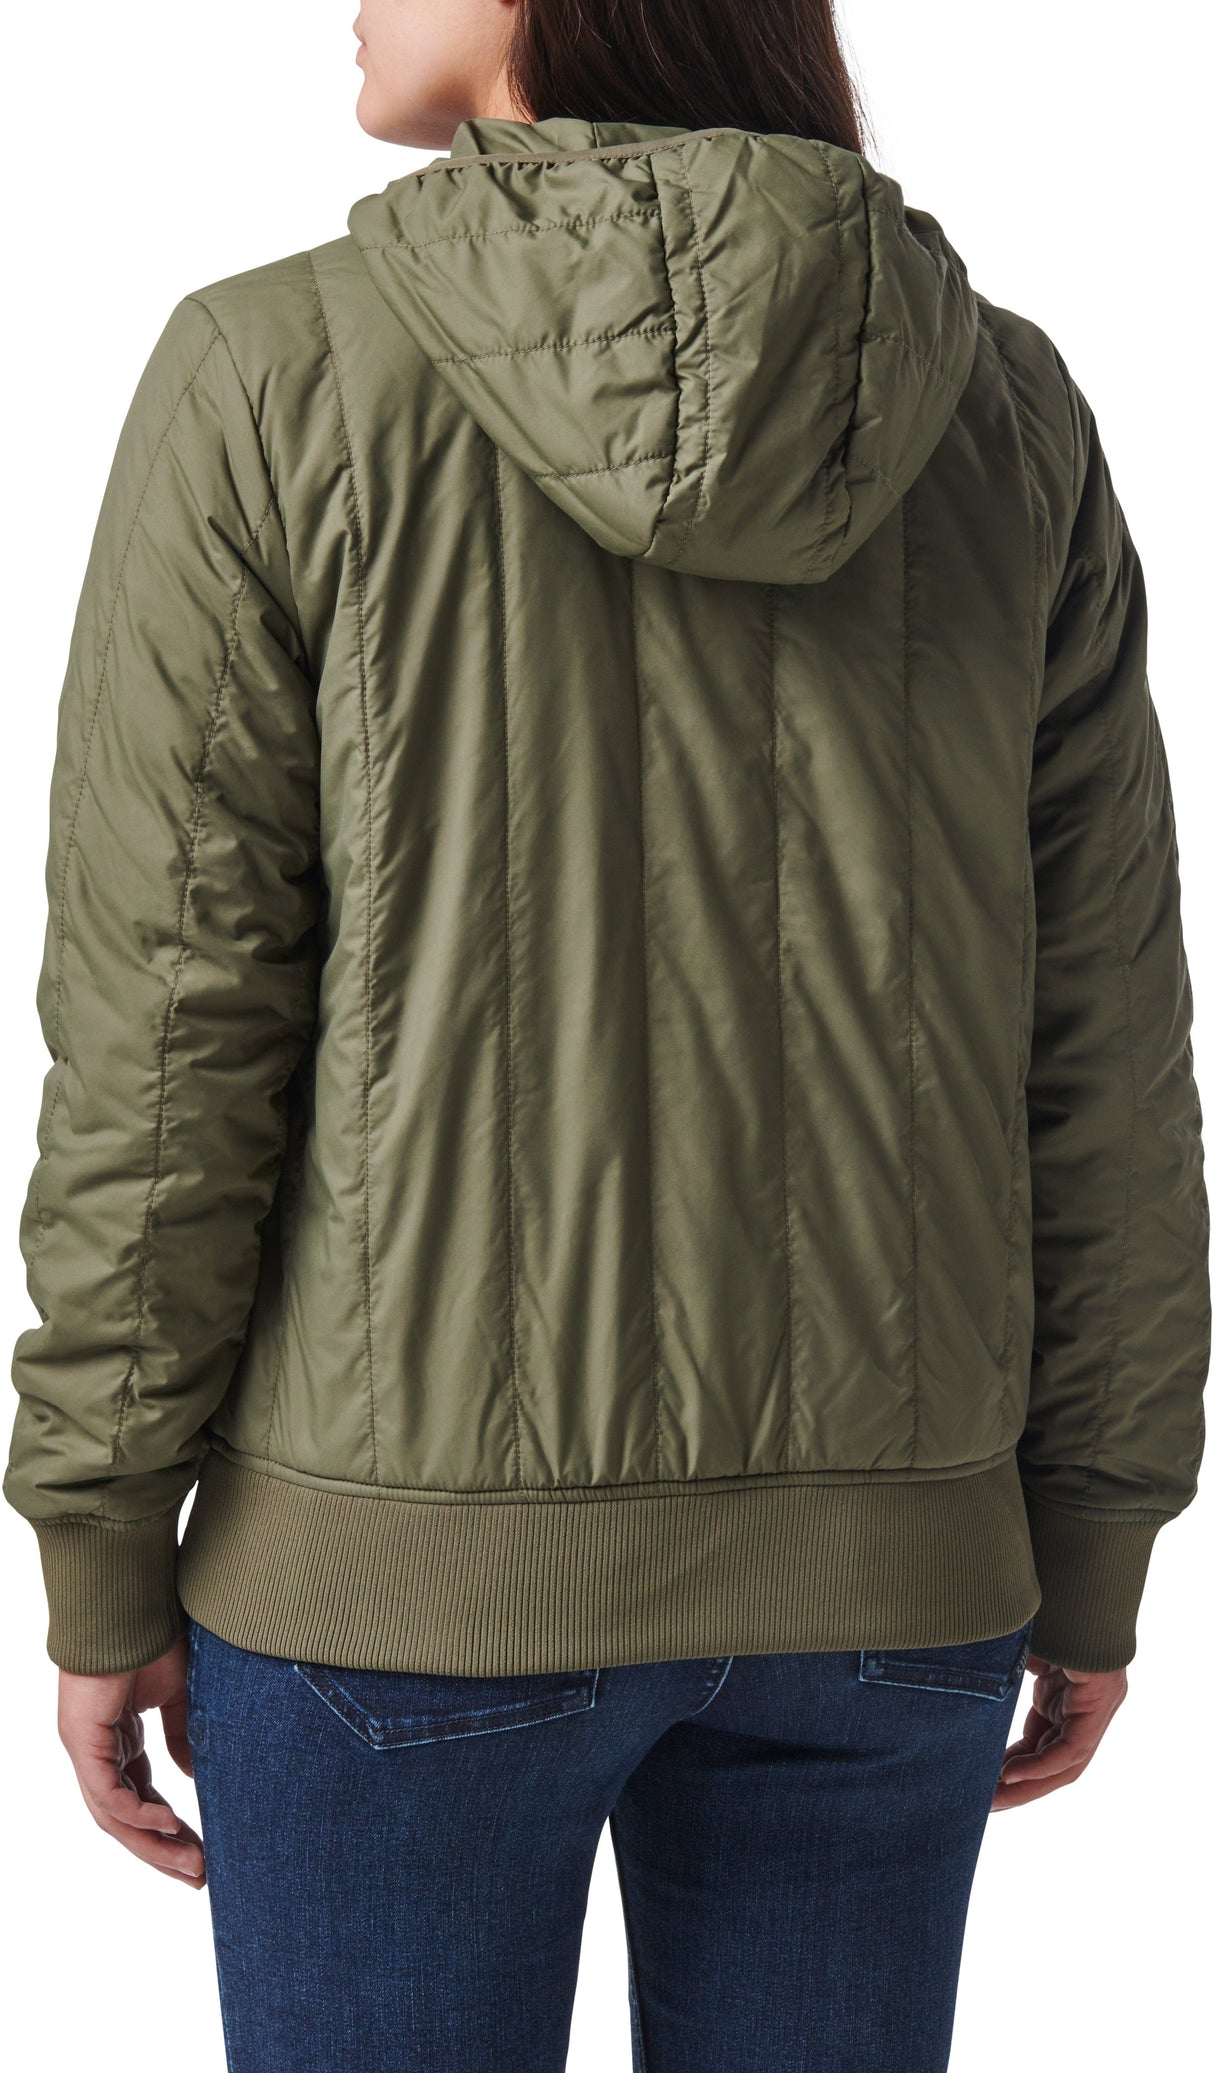 THERMEES INSULATOR JACKET